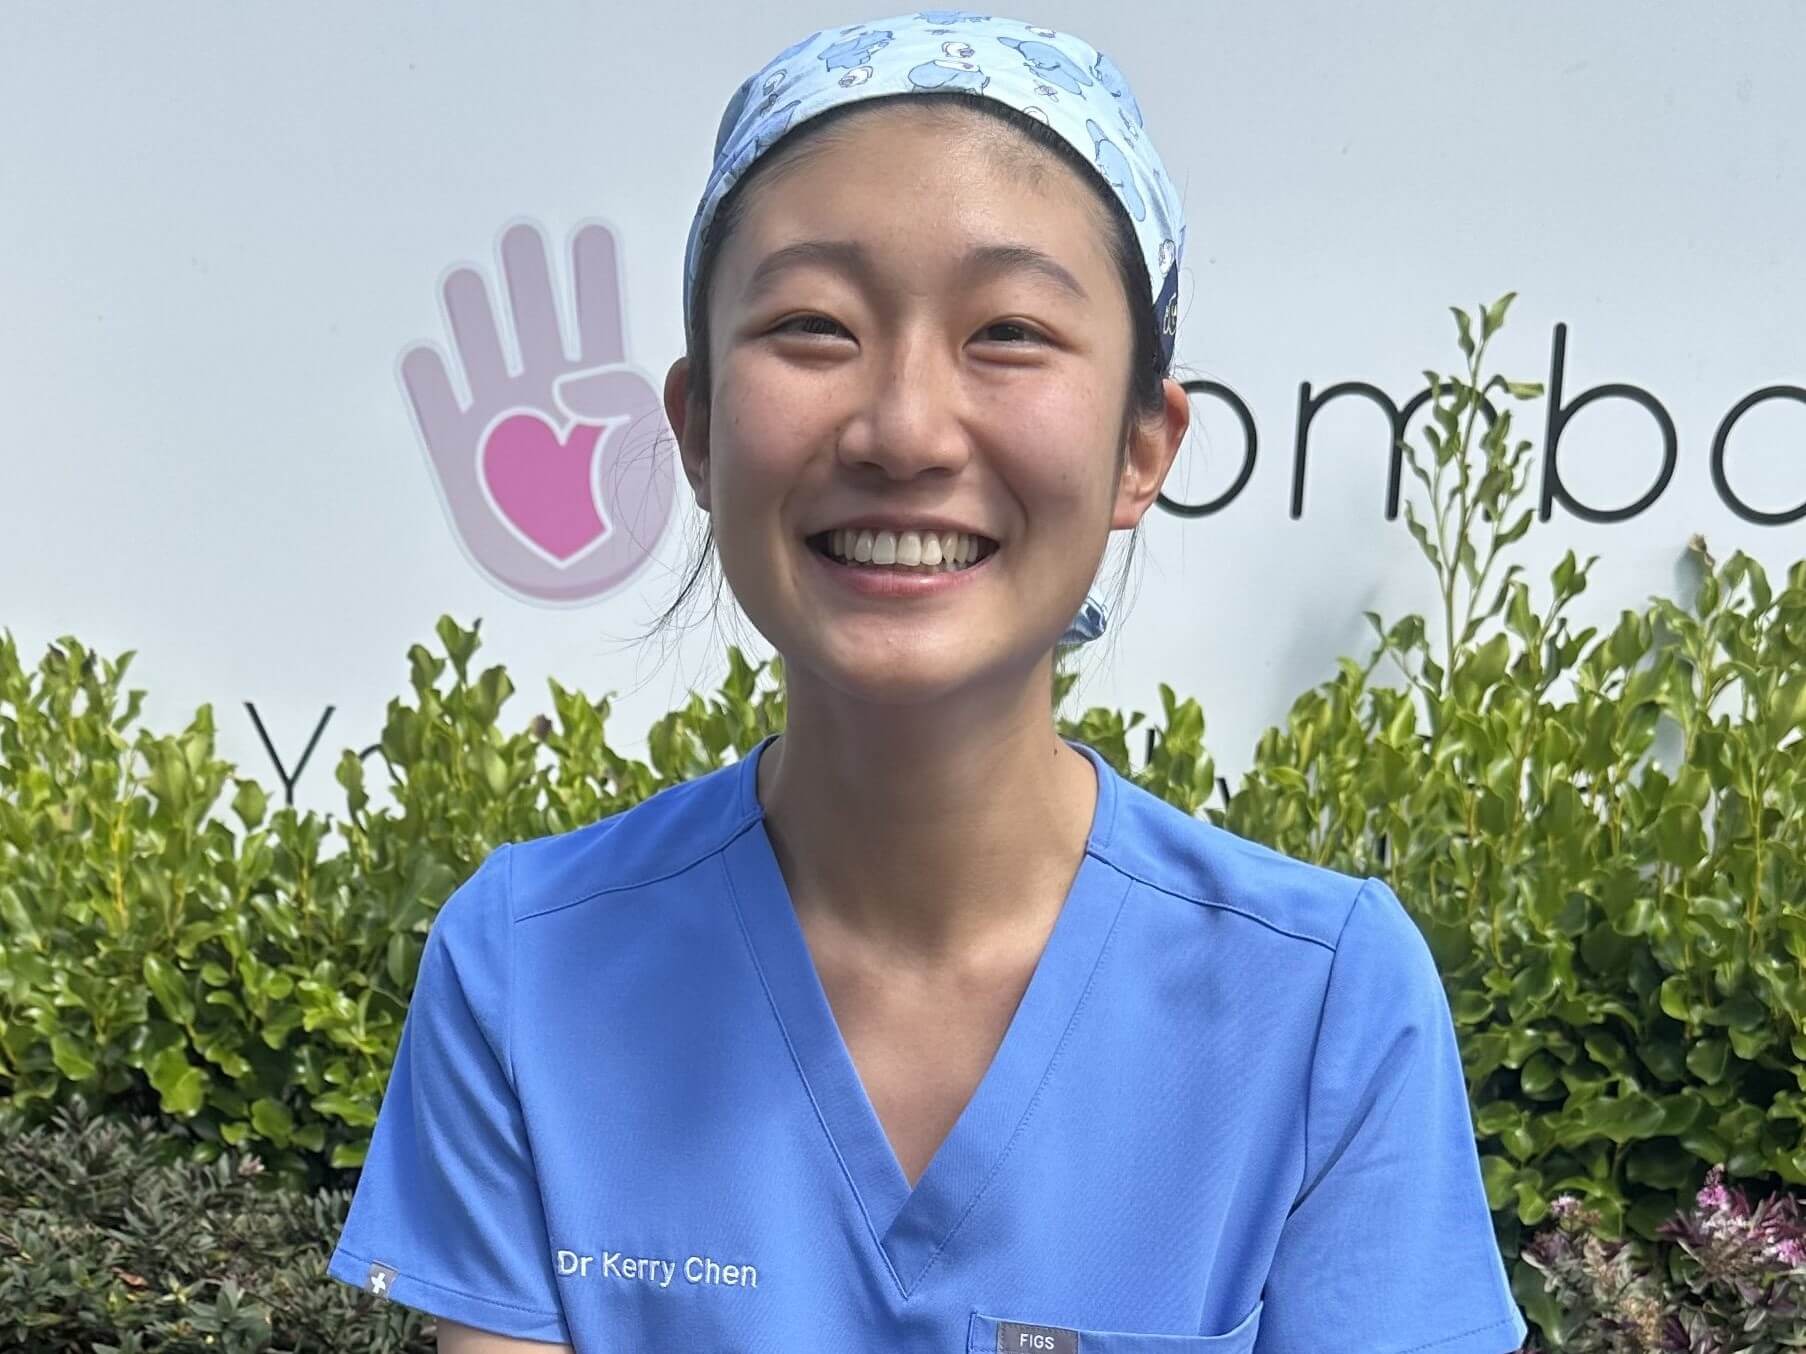 Dr Kerry Chen